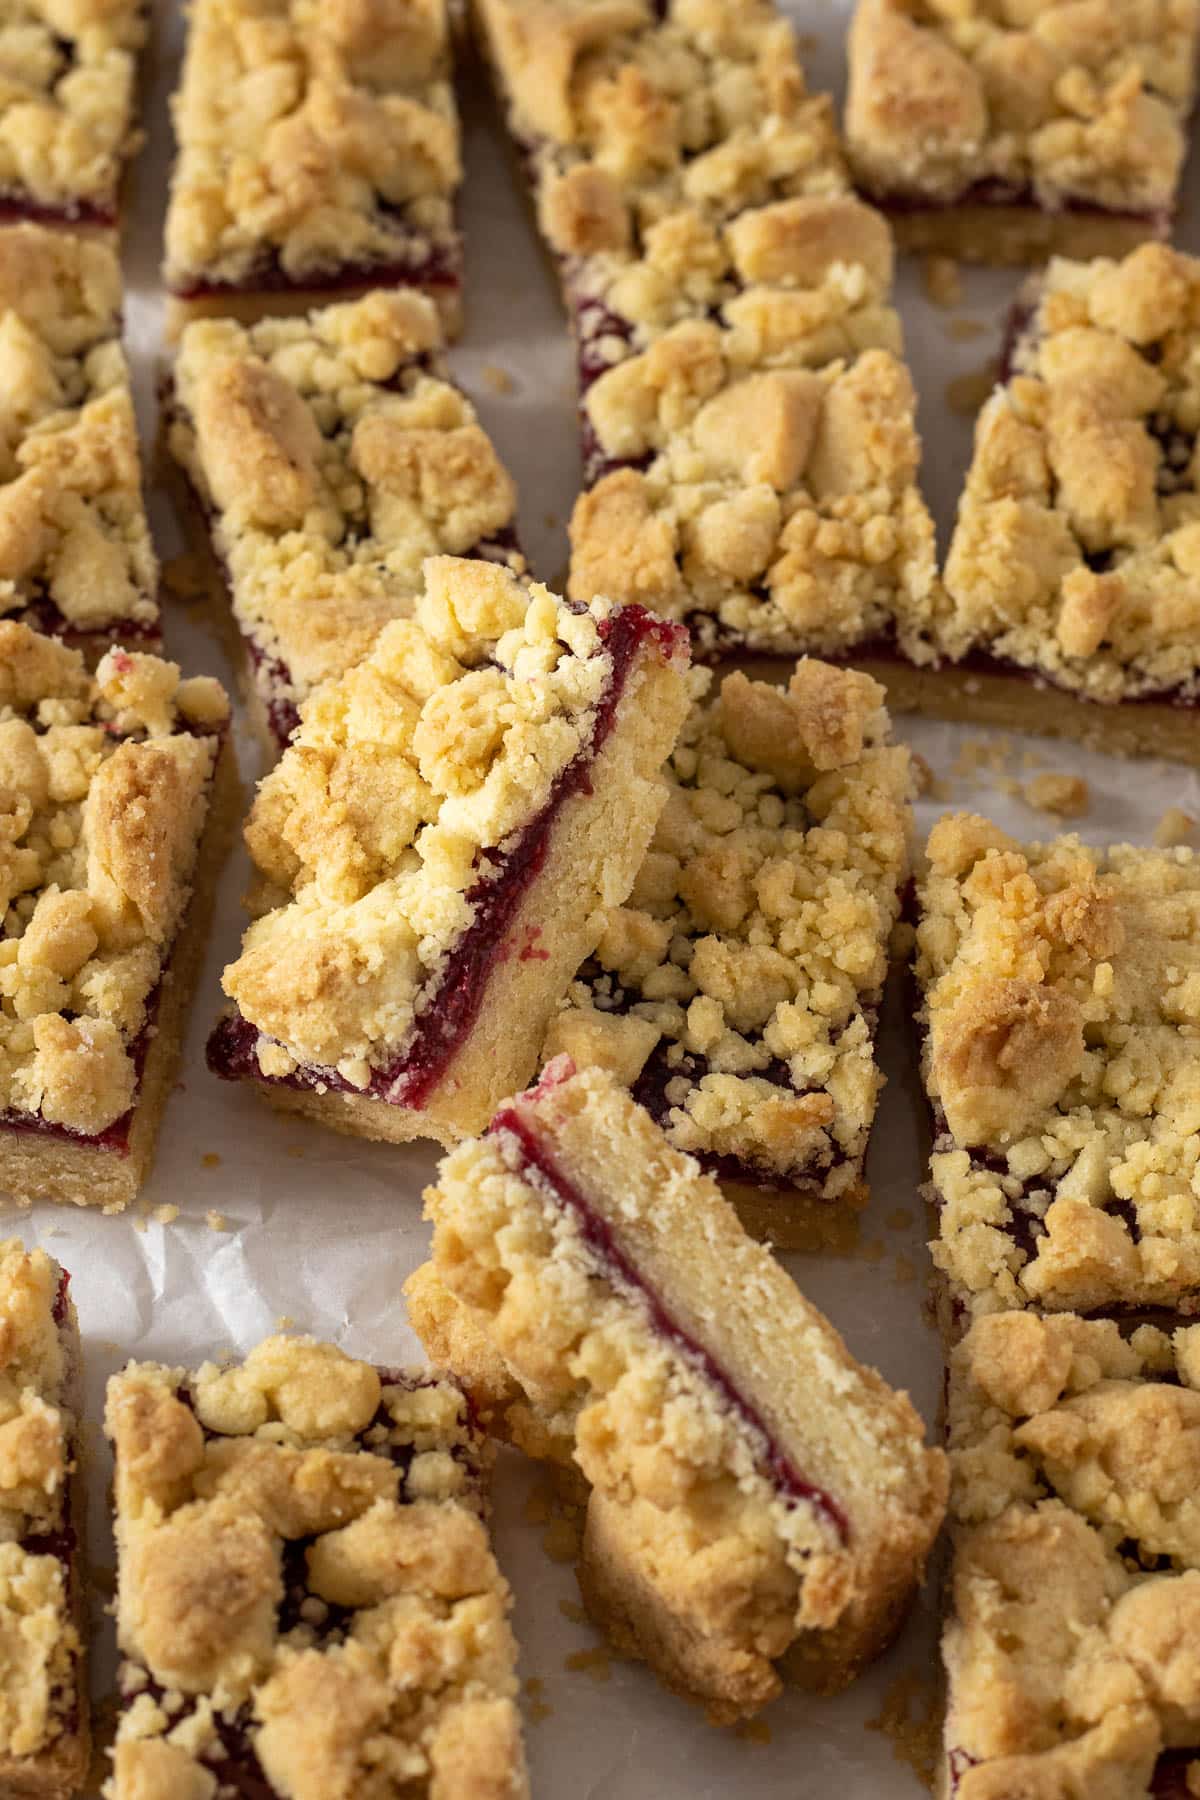 Sliced jam bars on a parchment paper.